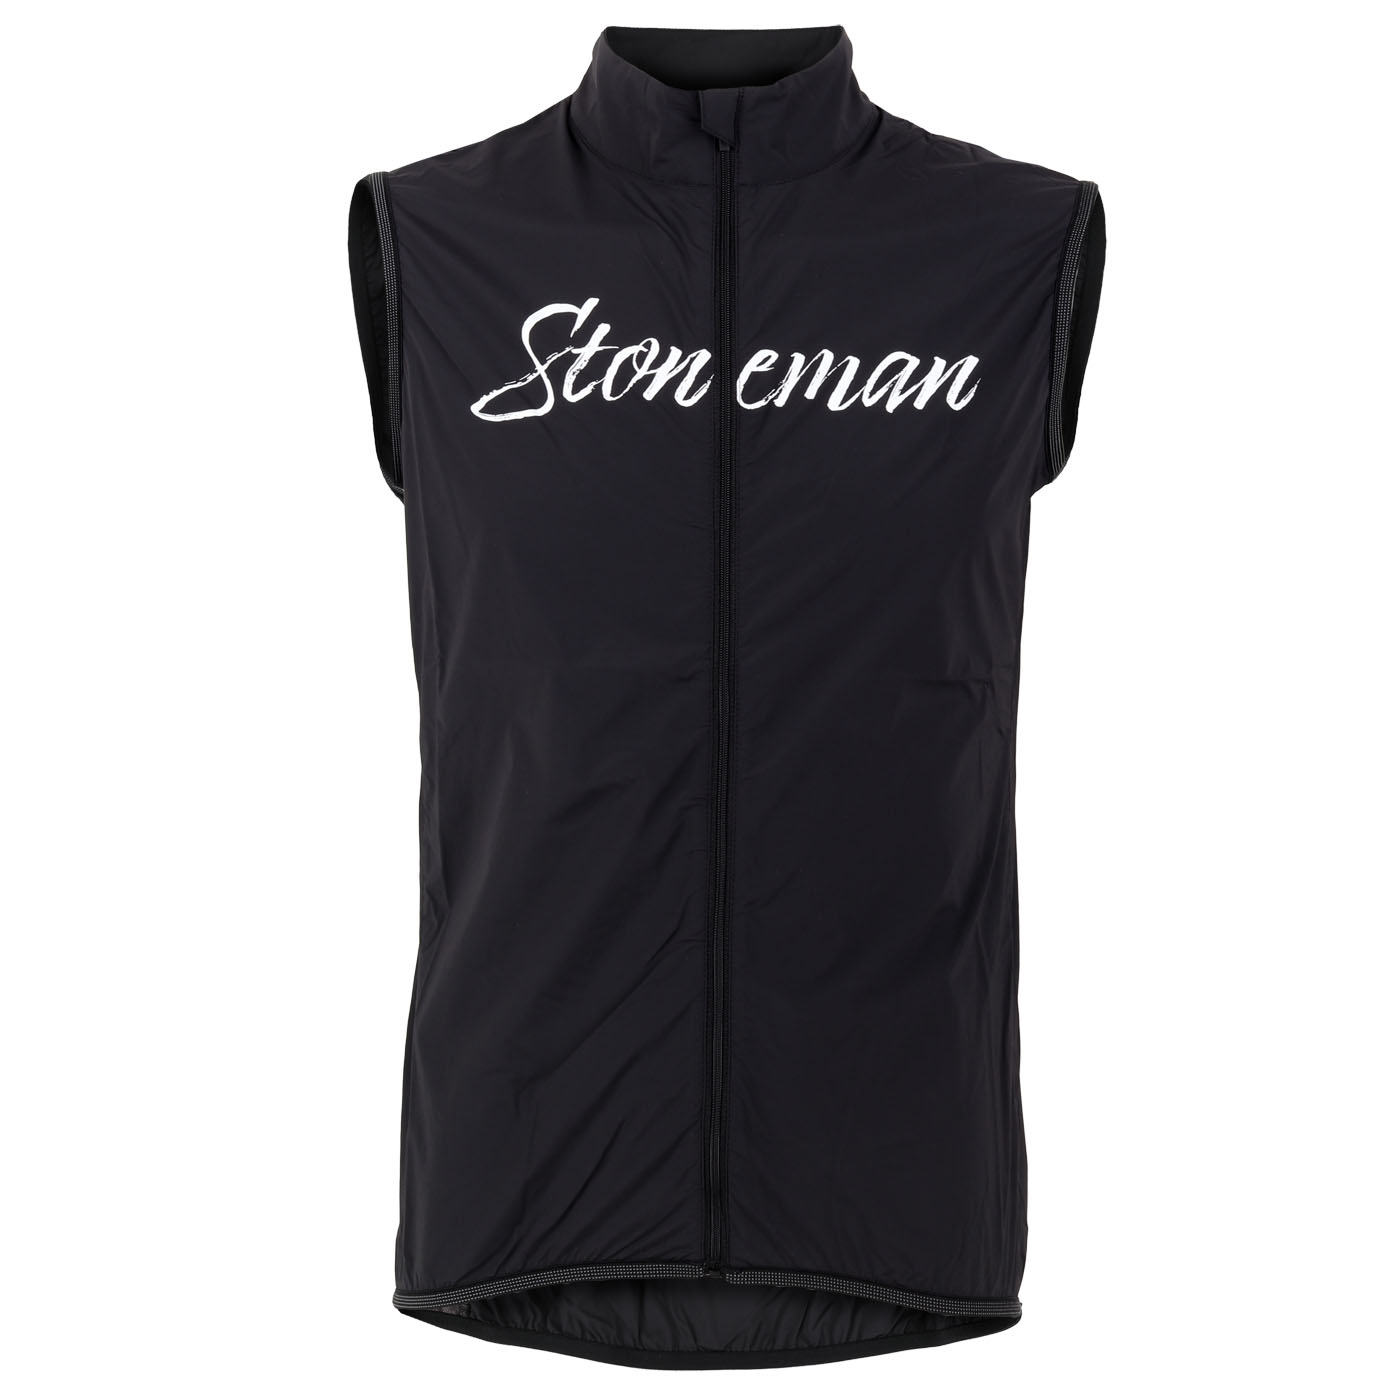 Picture of Stoneman Performance Vest by Maloja - moonless